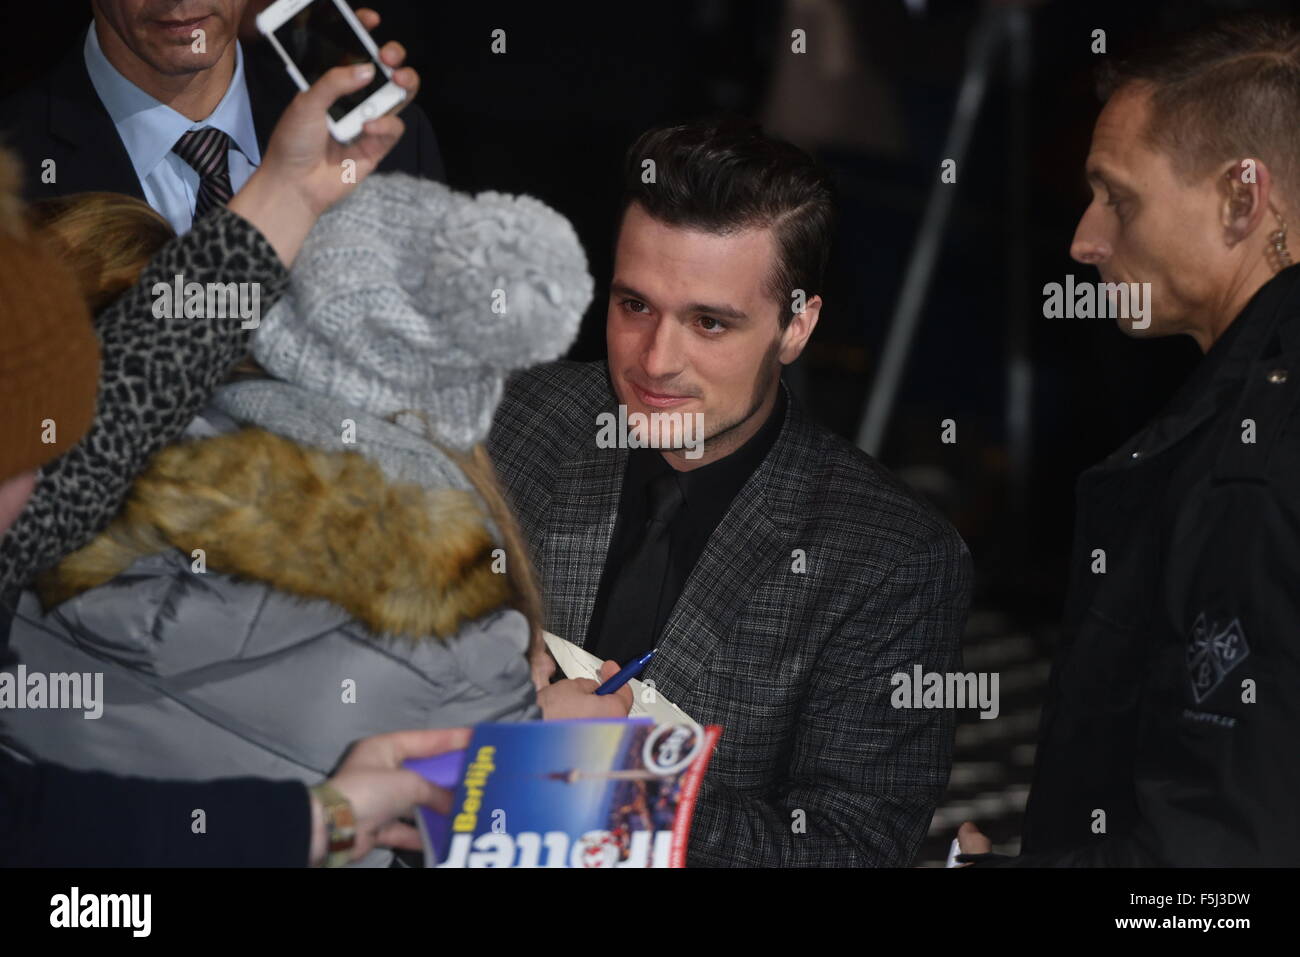 American actor Josh Hutcherson attends to the Premiere of 'The Hunger Games: Mockingjay - Part 2' at the Sony Center CineStar in Berlin, Germany. On November 04, 2015./picture alliance Stock Photo